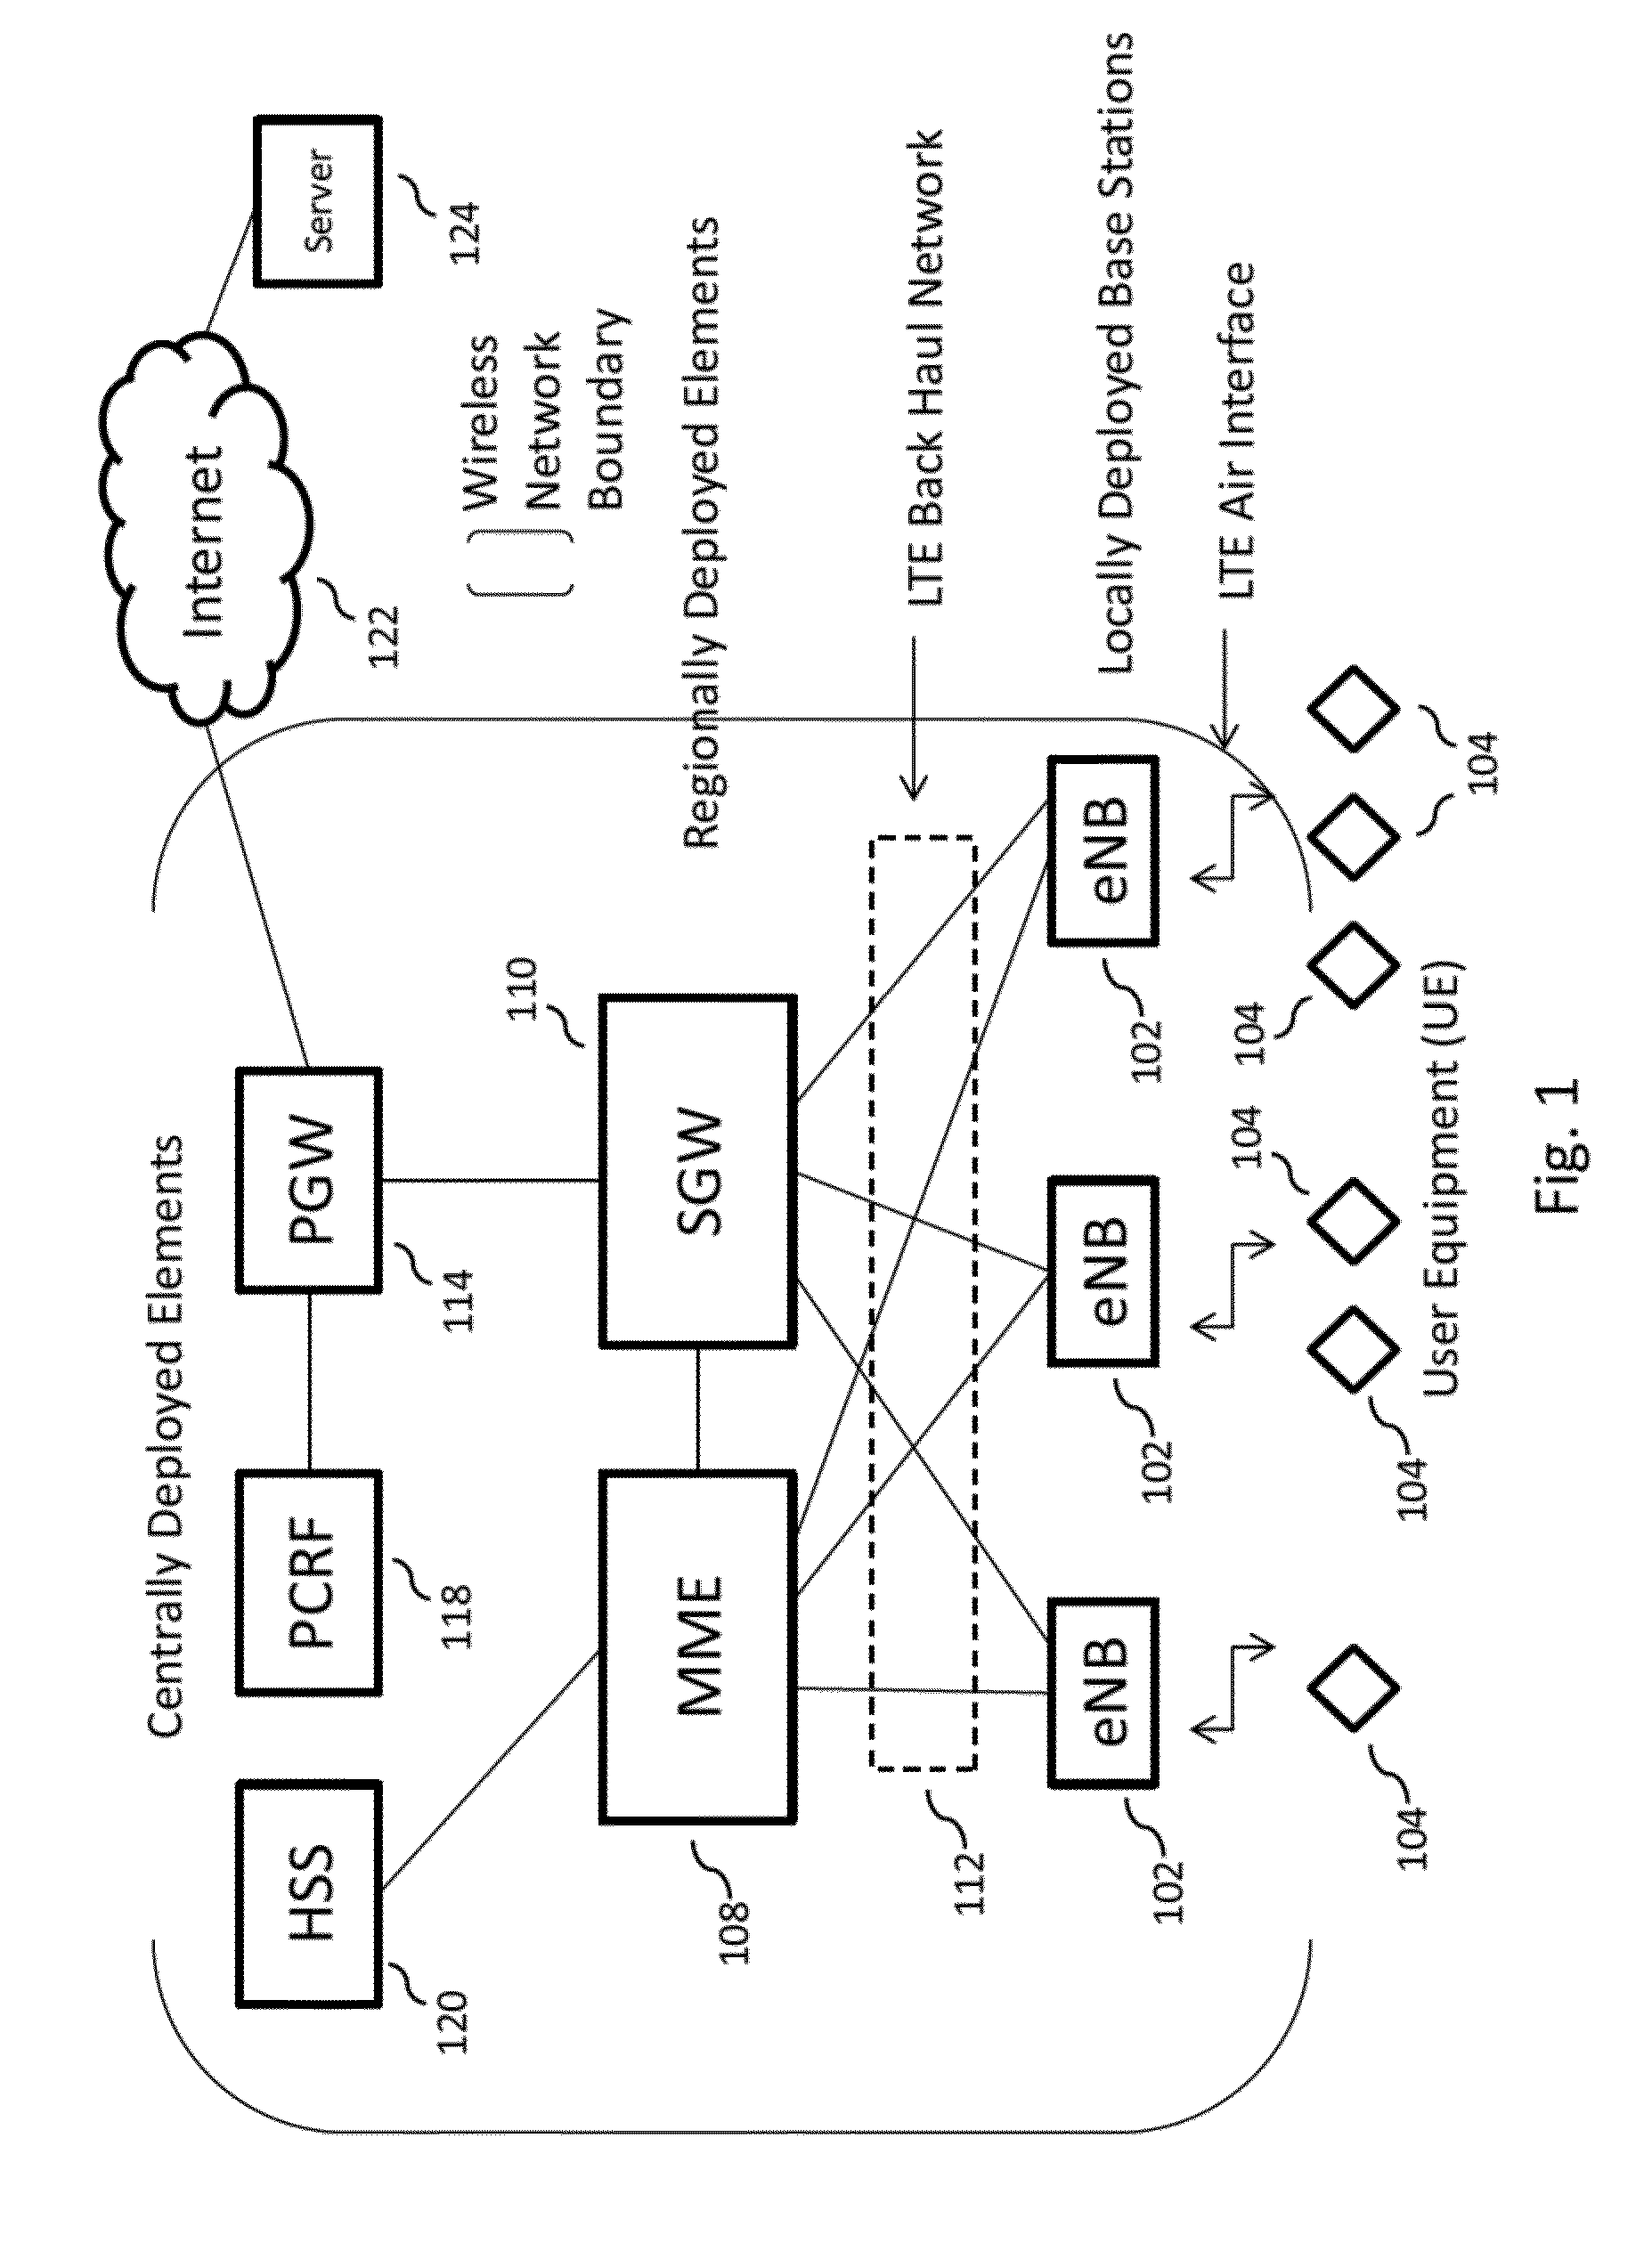 Network migration queuing service in a wireless network